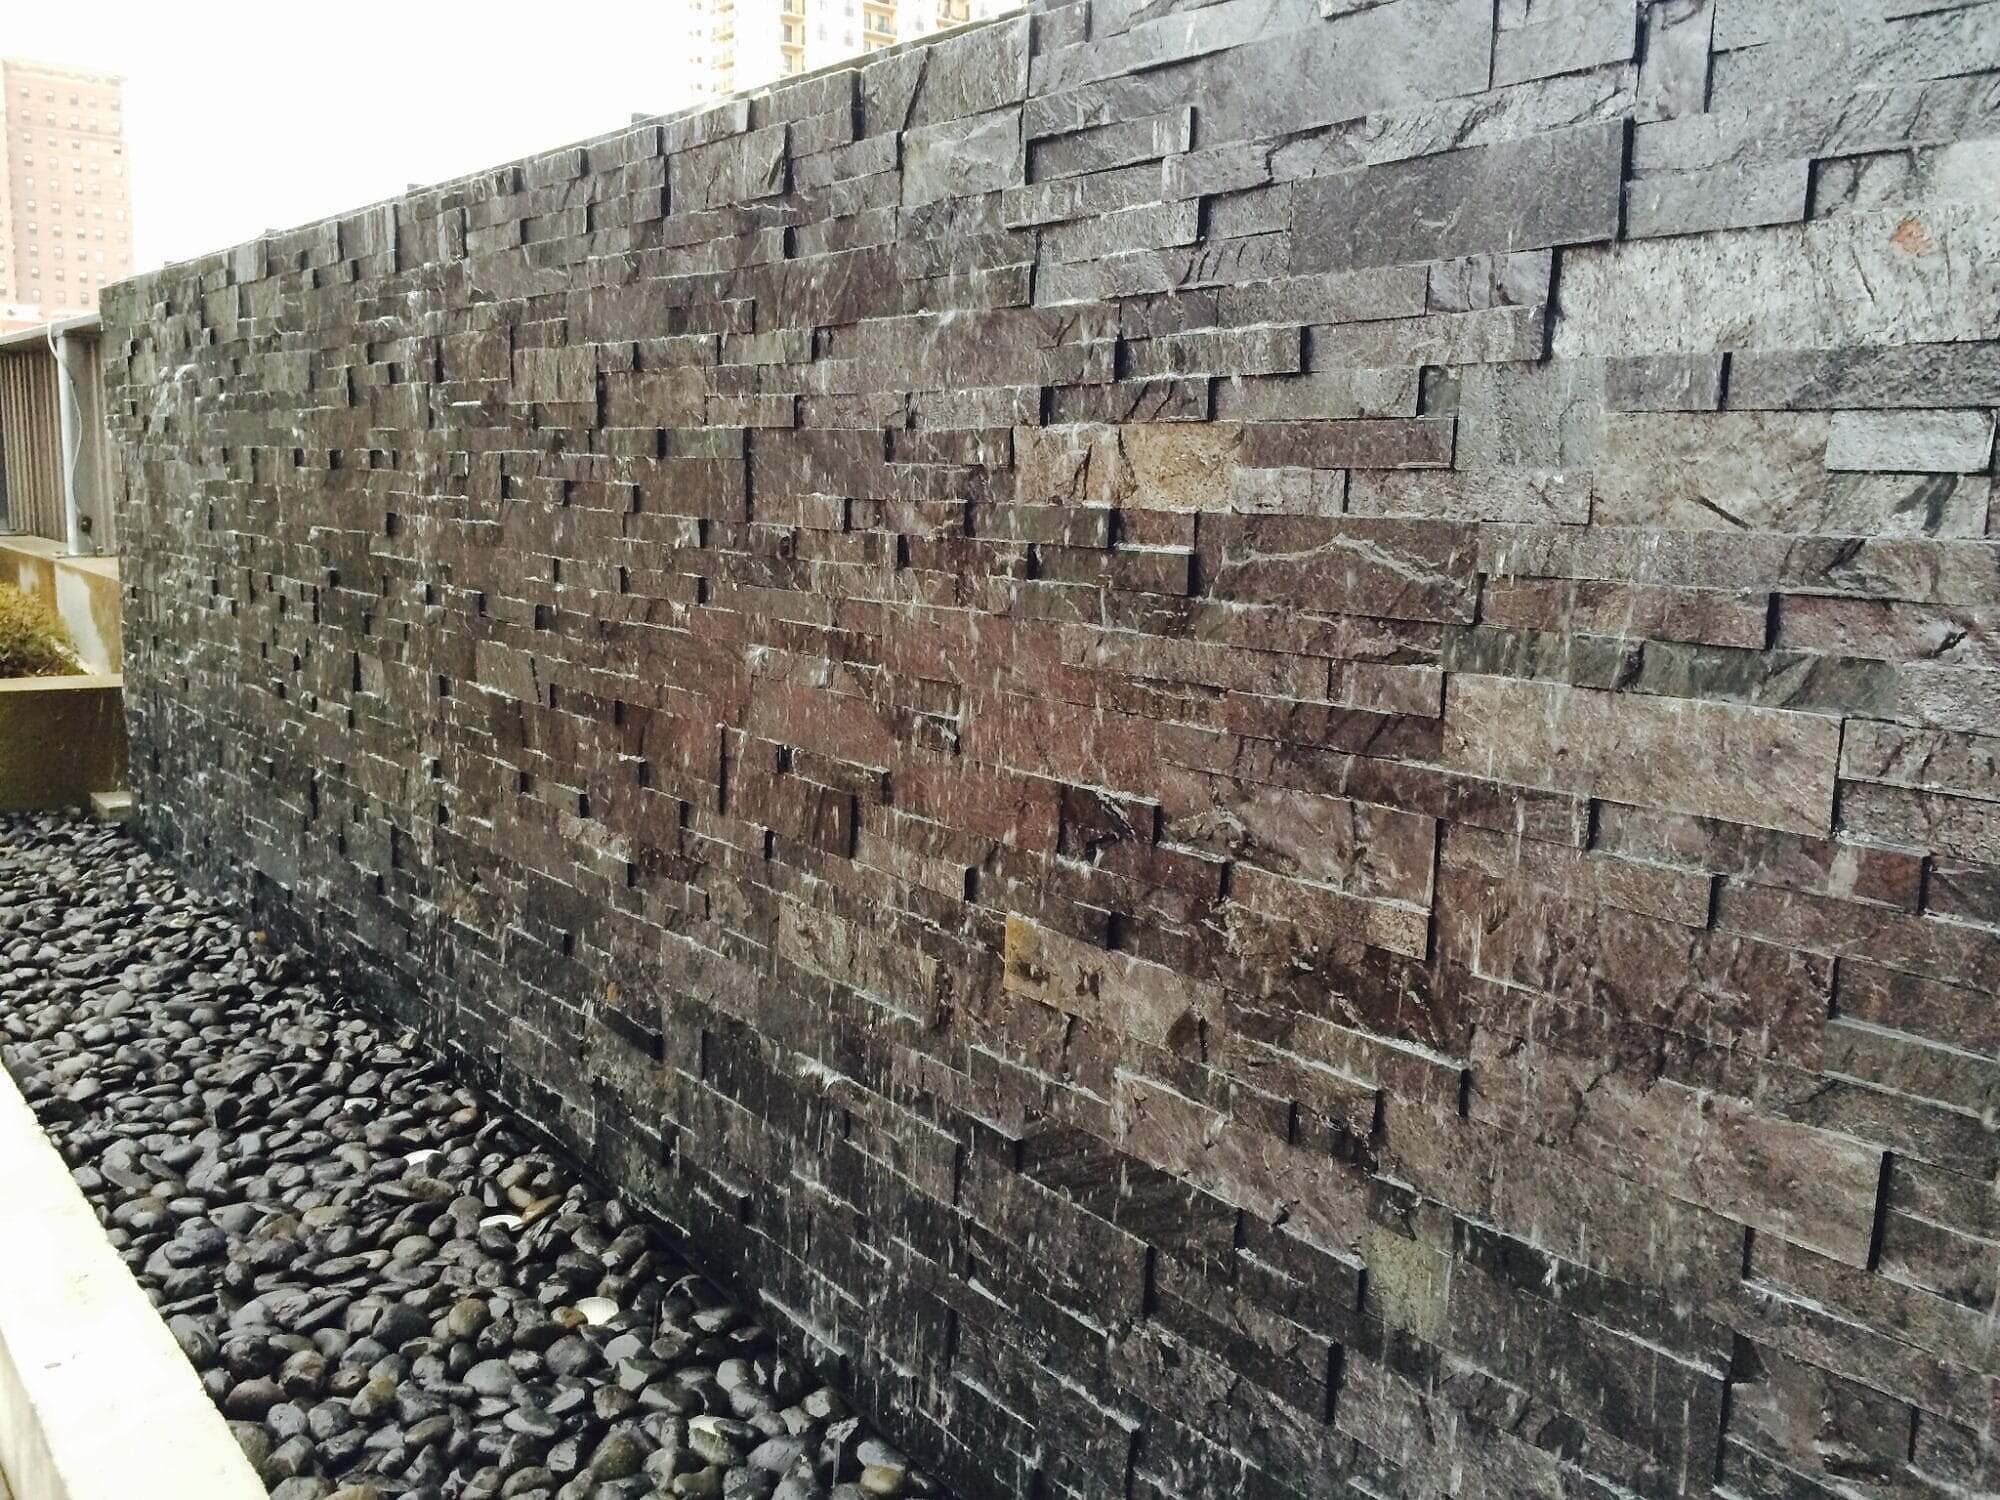 Tile Water Wall. Waterfall Outdoor Rooftop Garden at 1401 S. State Chicago